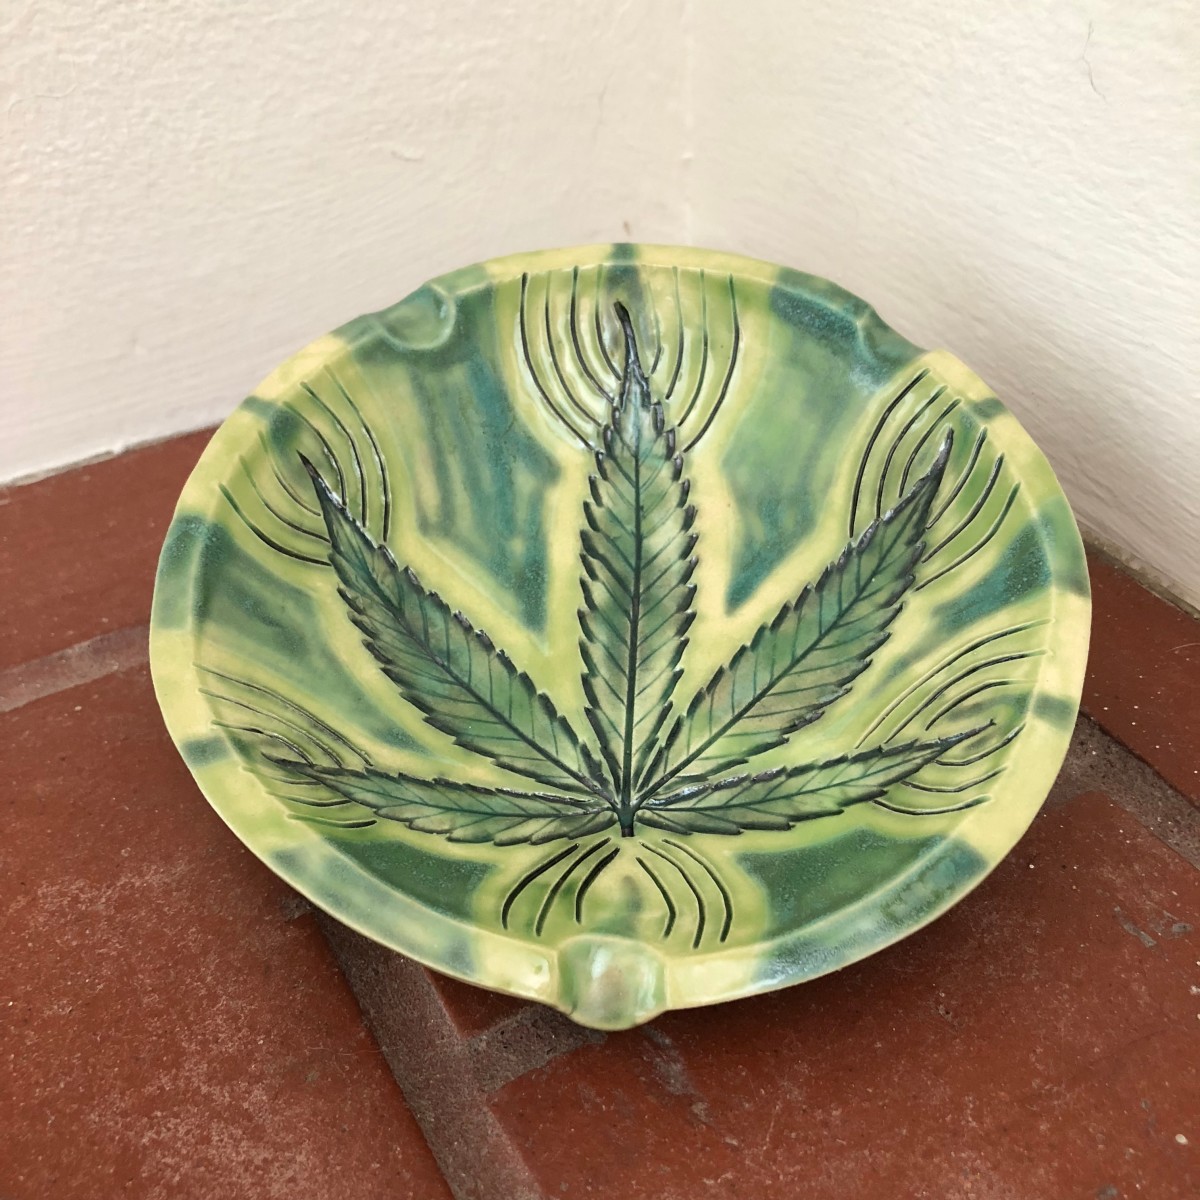 The Green Energy bowl by Nell Eakin 